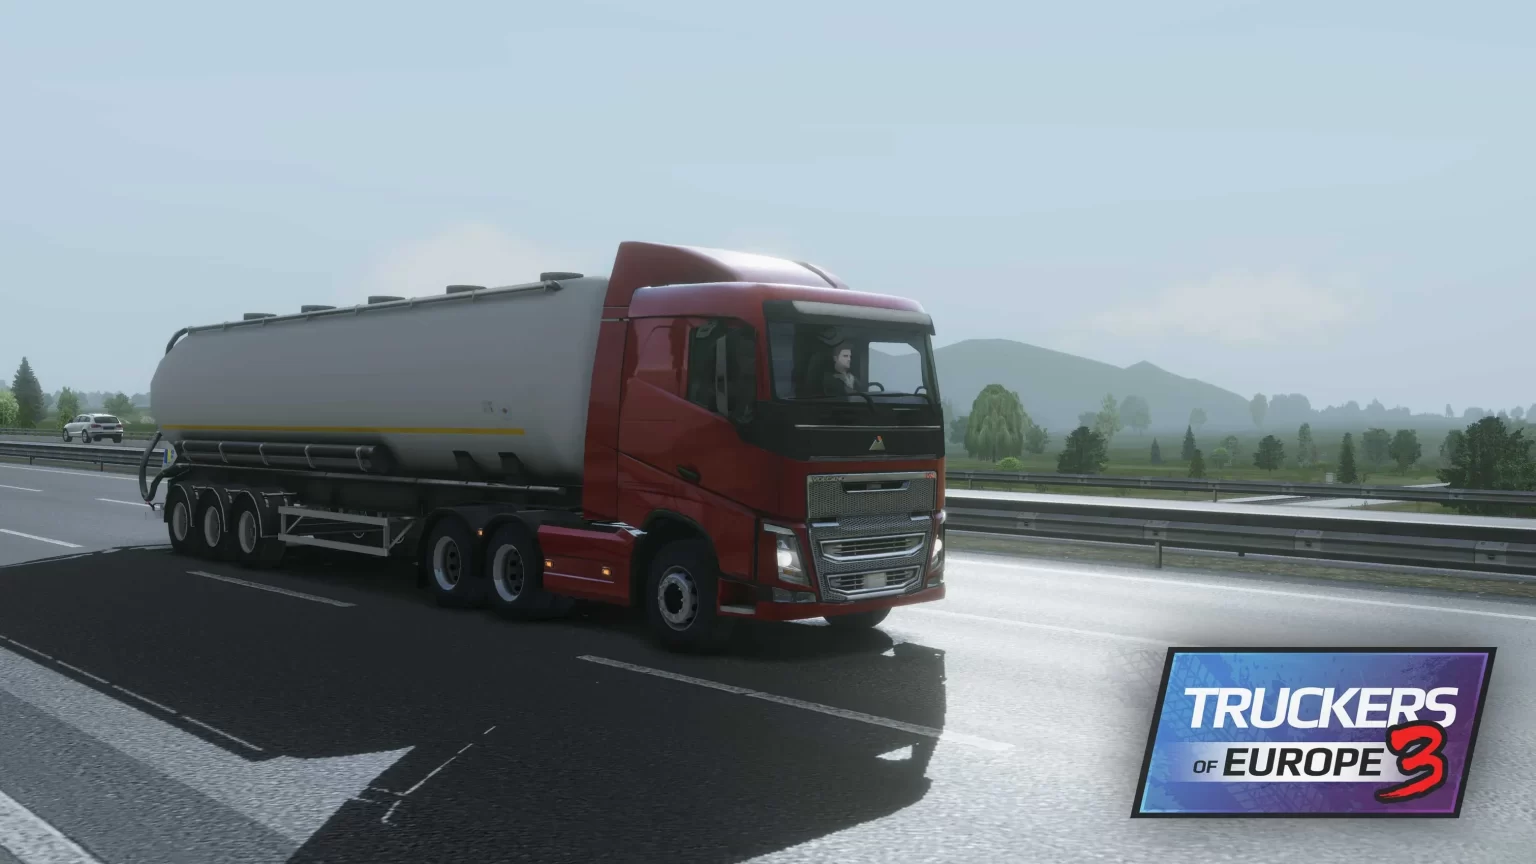 unnamed 27 1 1536x864 - Truckers of Europe 3 Mod Apk V0.35.1 (Unlimited Money)